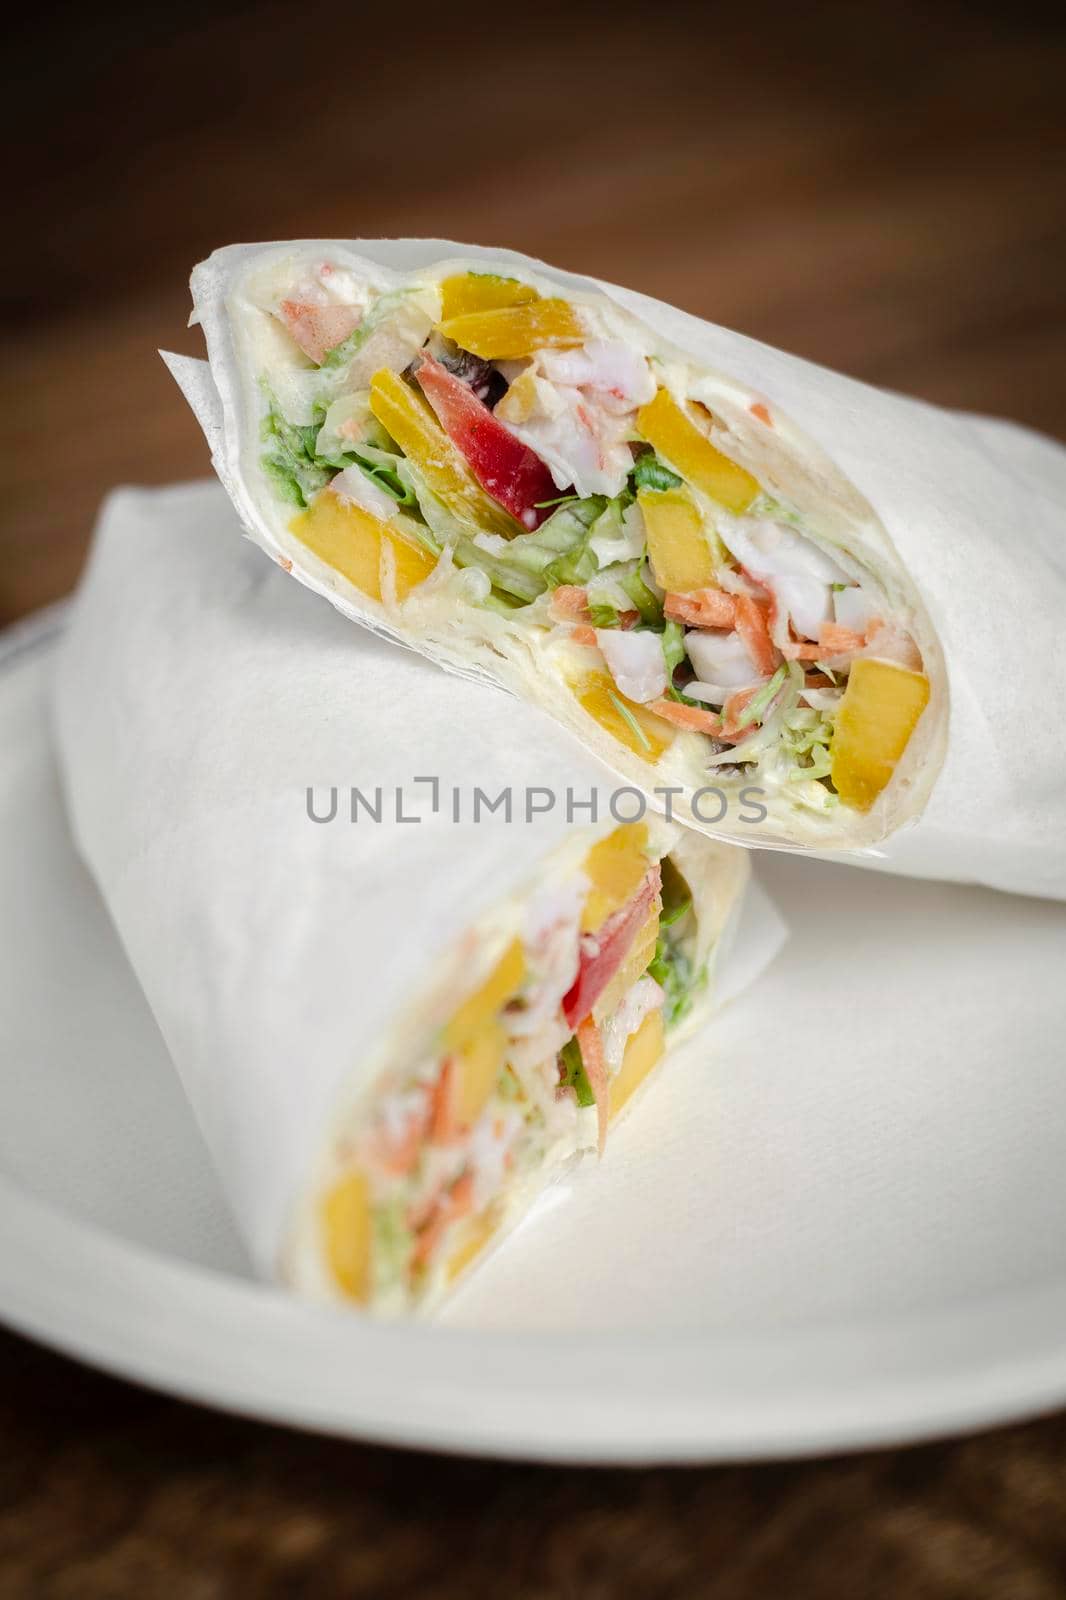 crab mayonnaise and salad wrap on wooden table by jackmalipan